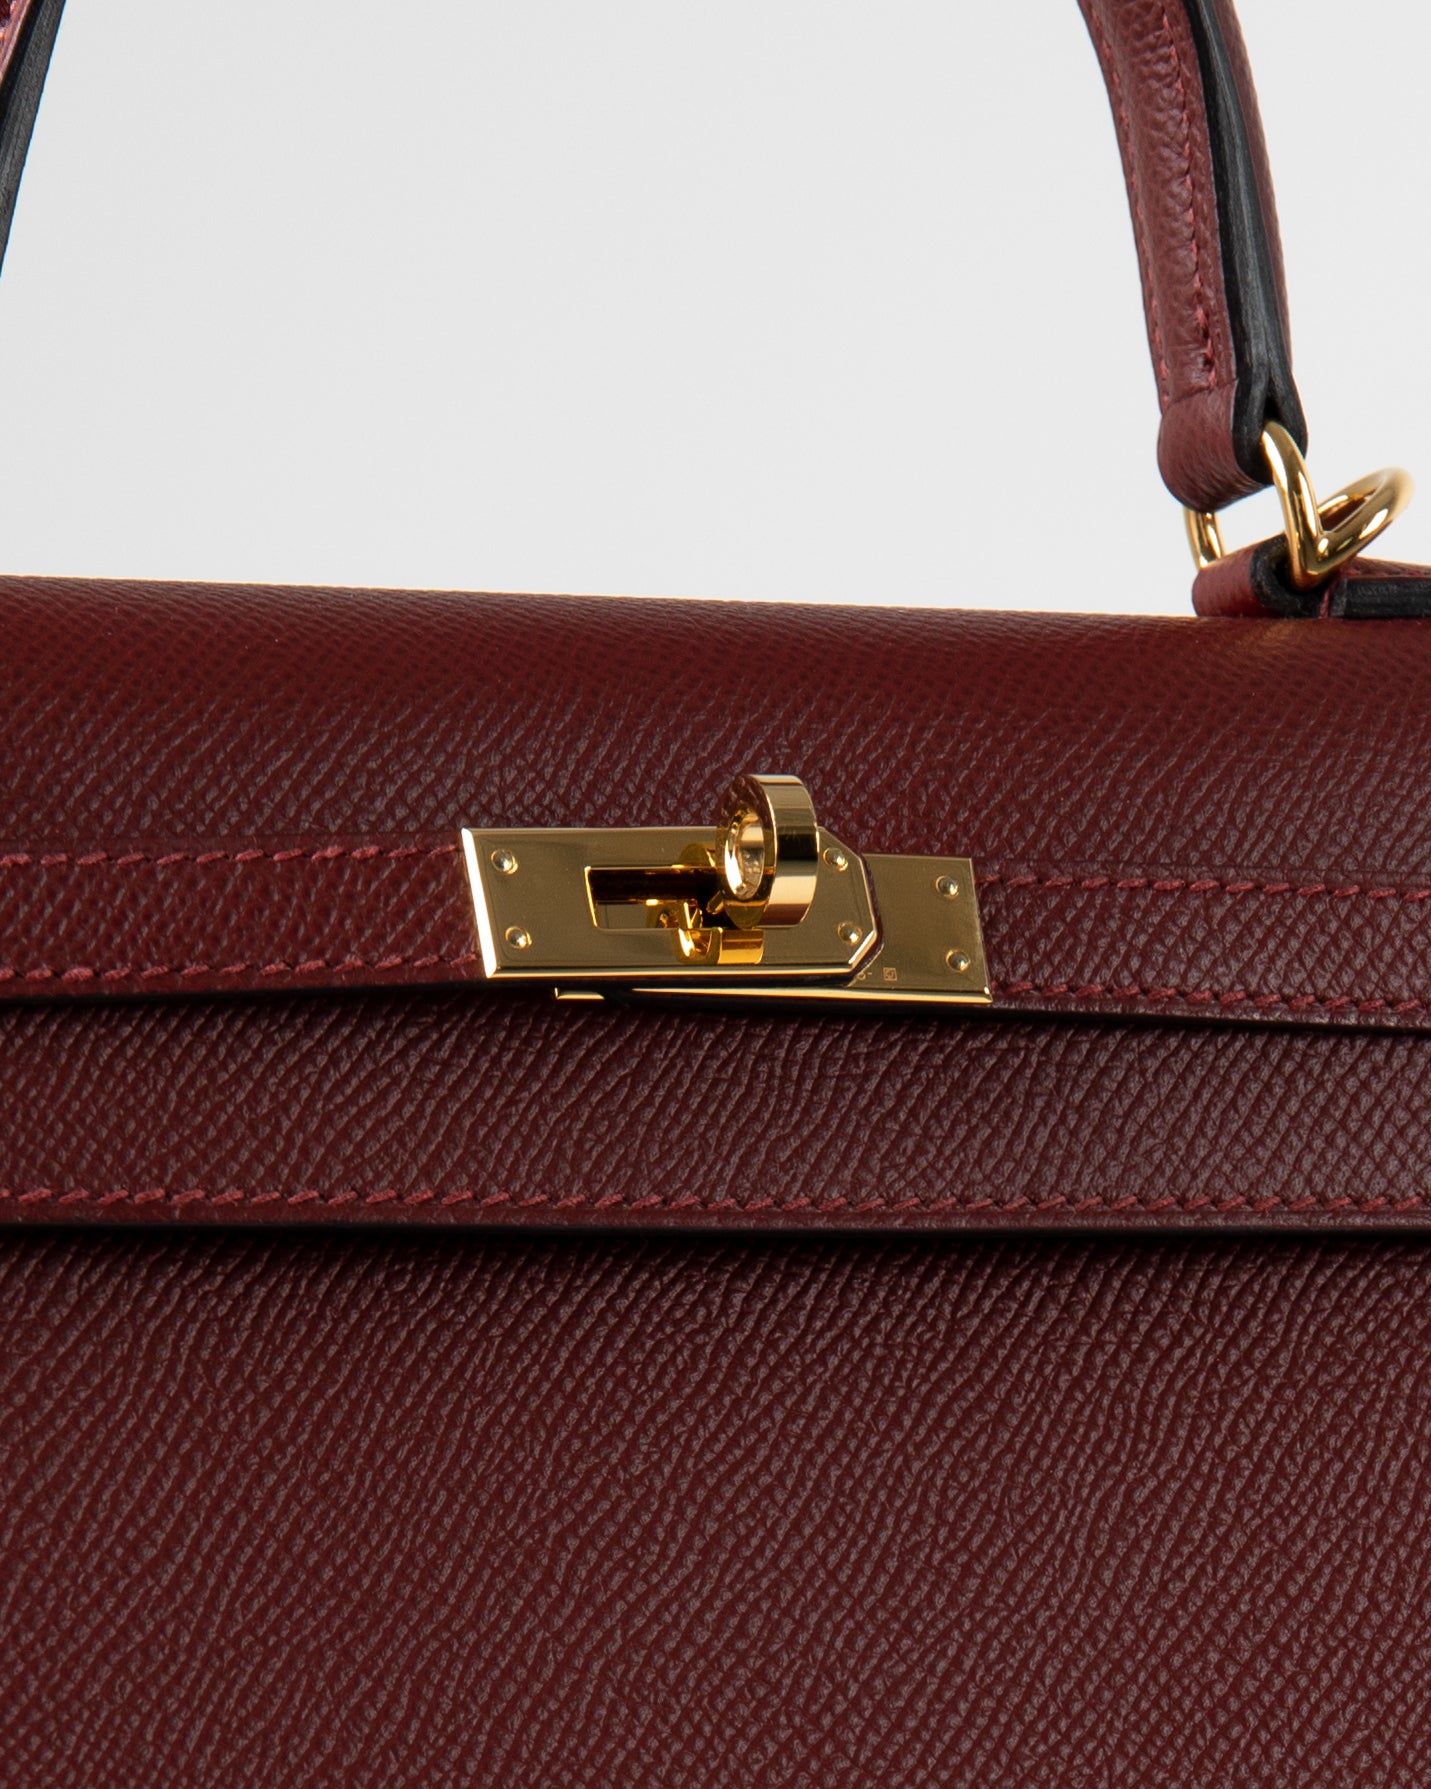 Hermès Kelly 25 Rouge Sellier Epsom With Gold Hardware - AG Concierge Fzco